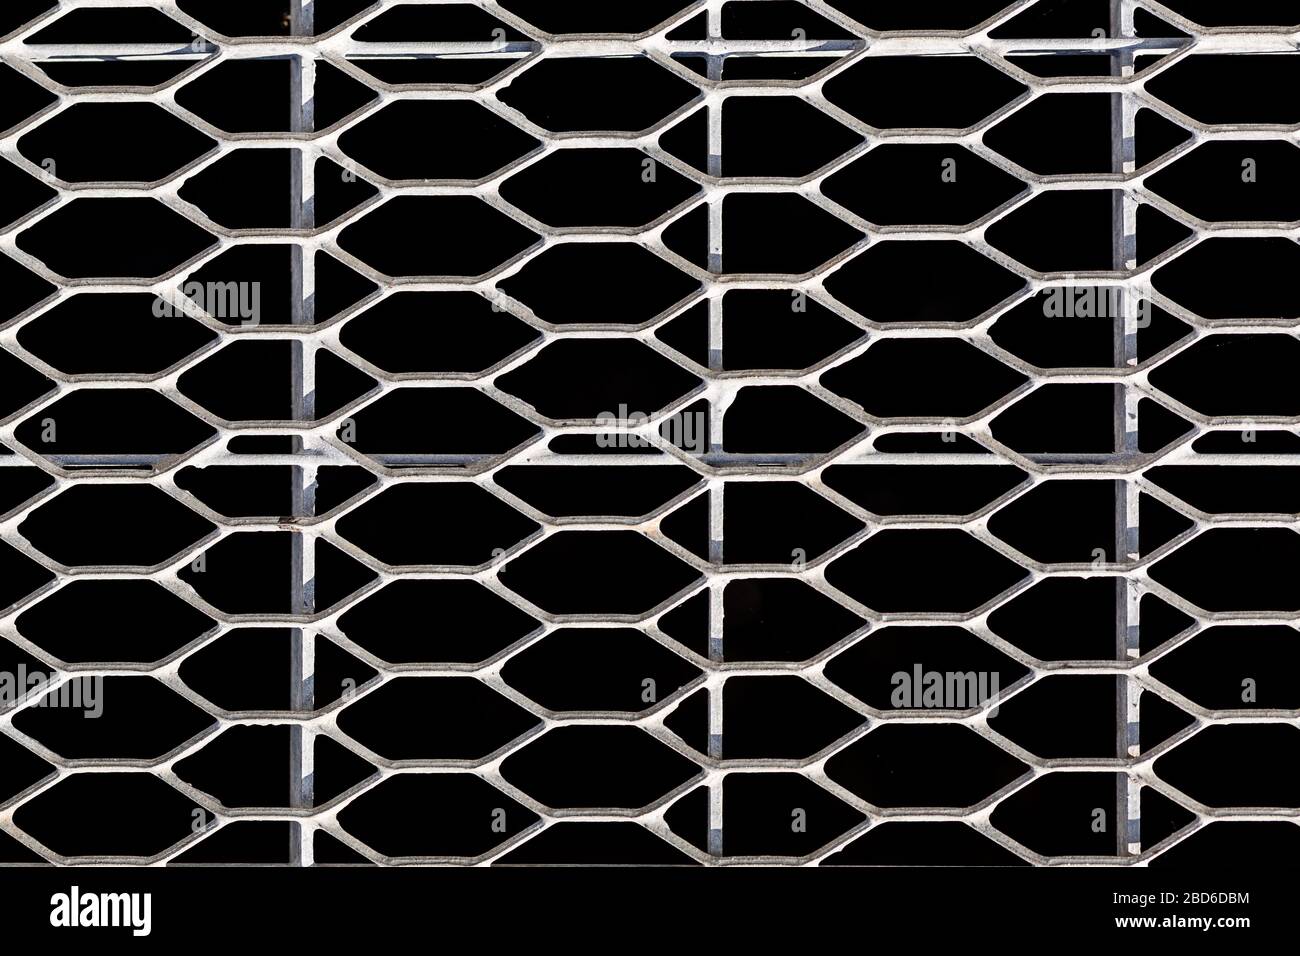 Metal grille on a black background. Geometric patterns. Stock Photo